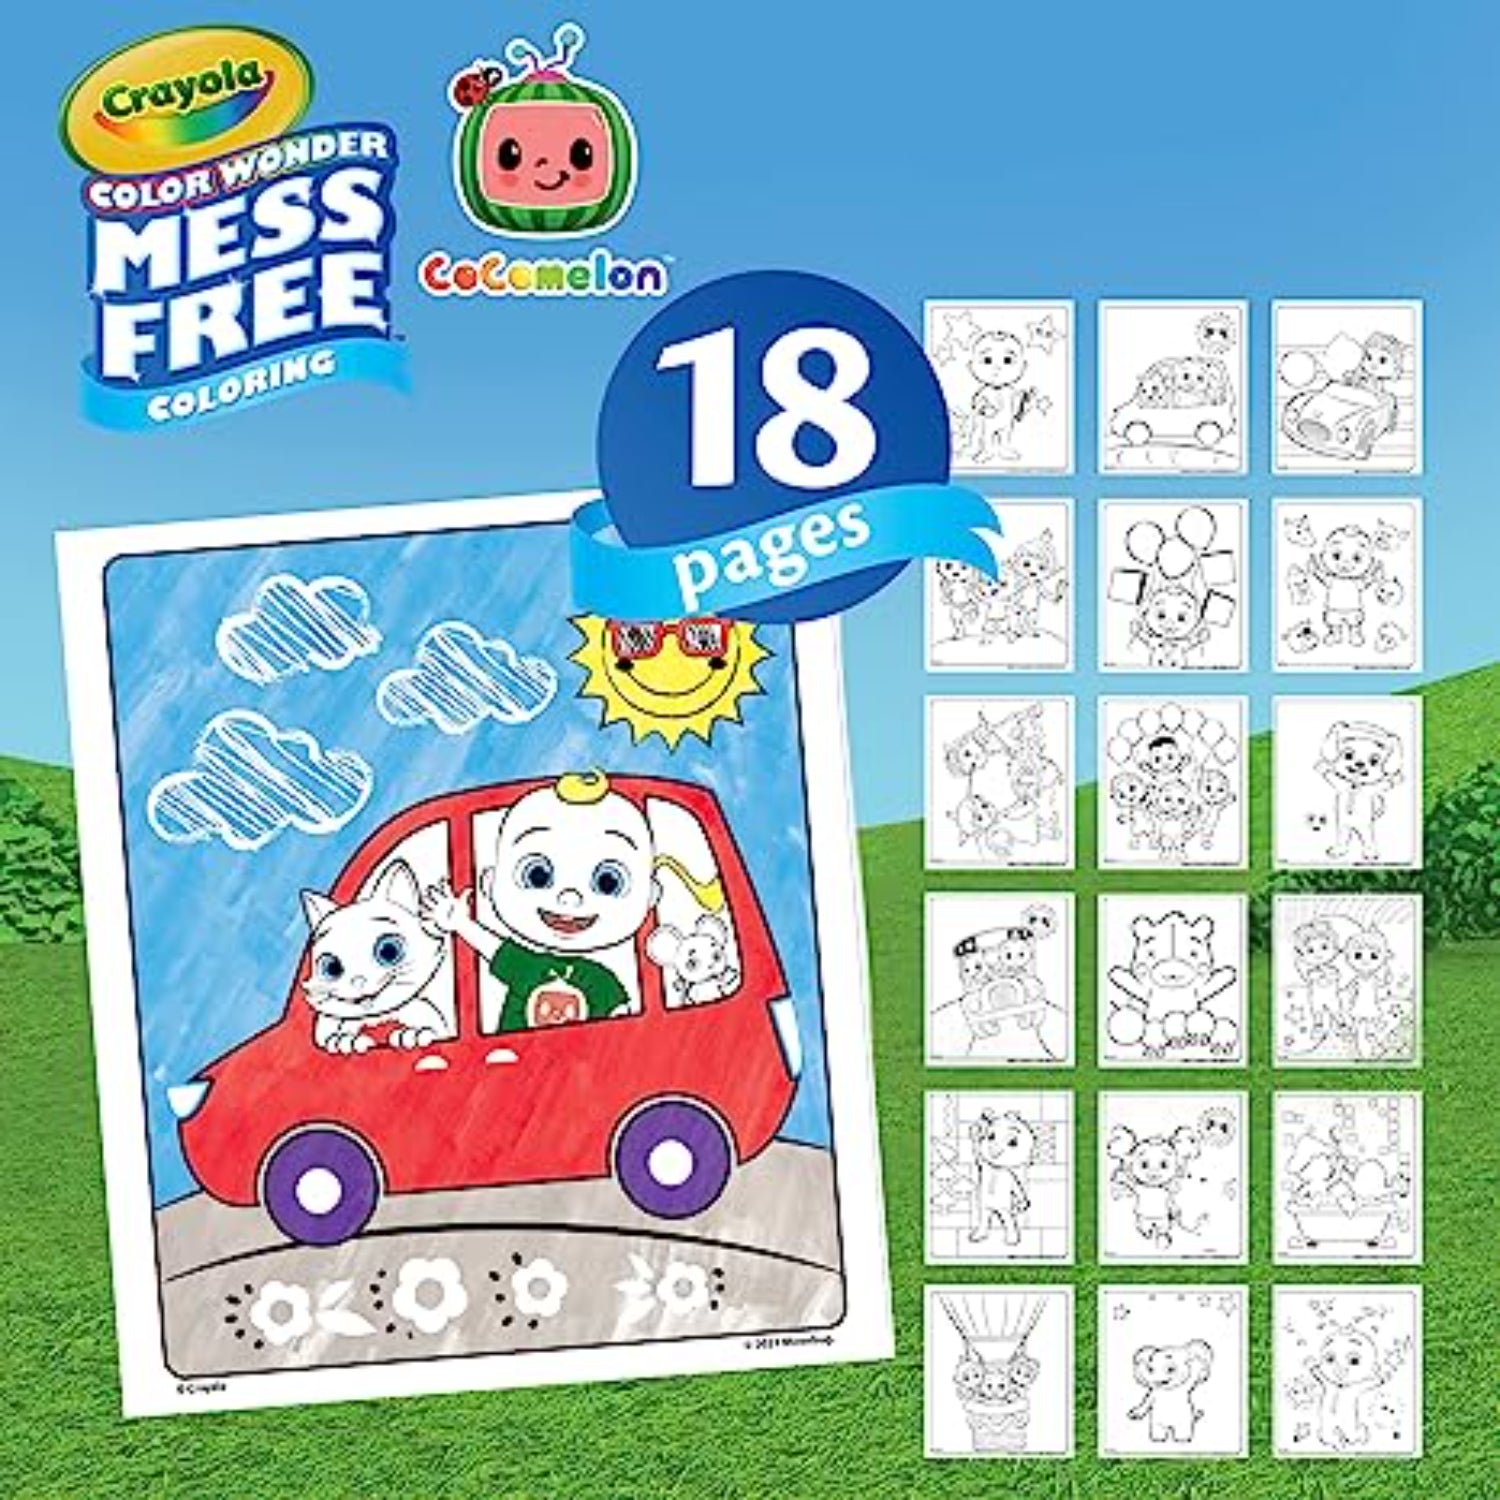 Crayola Color Wonder Cocomelon Coloring Pages & Markers, Mess Free Coloring